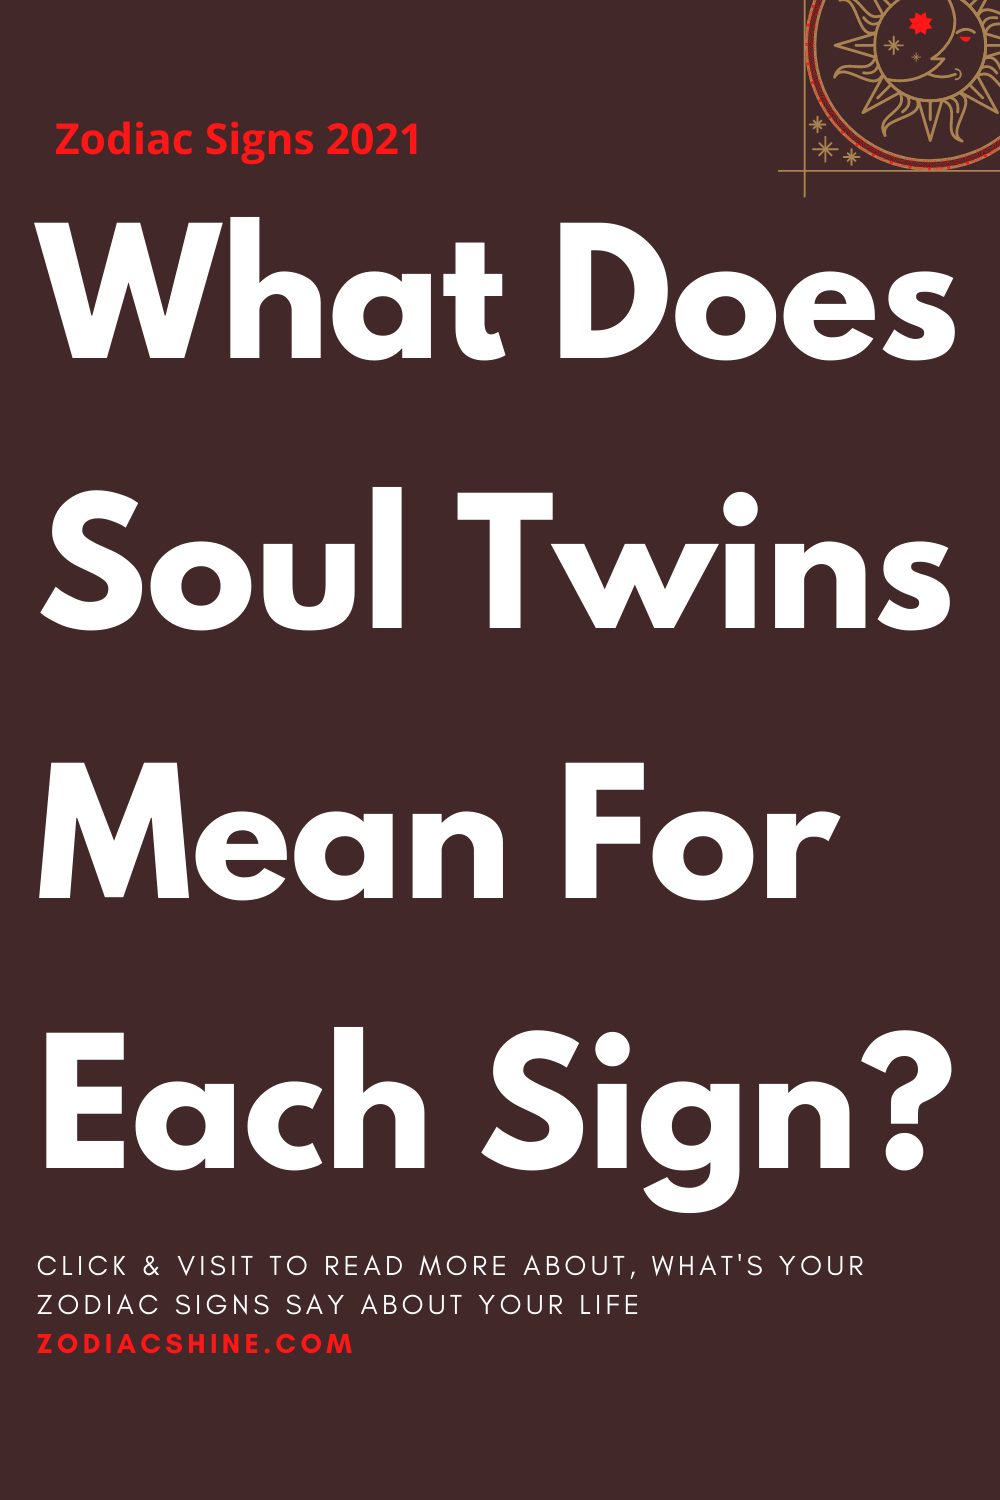 What Does Soul Twins Mean For Each Sign?